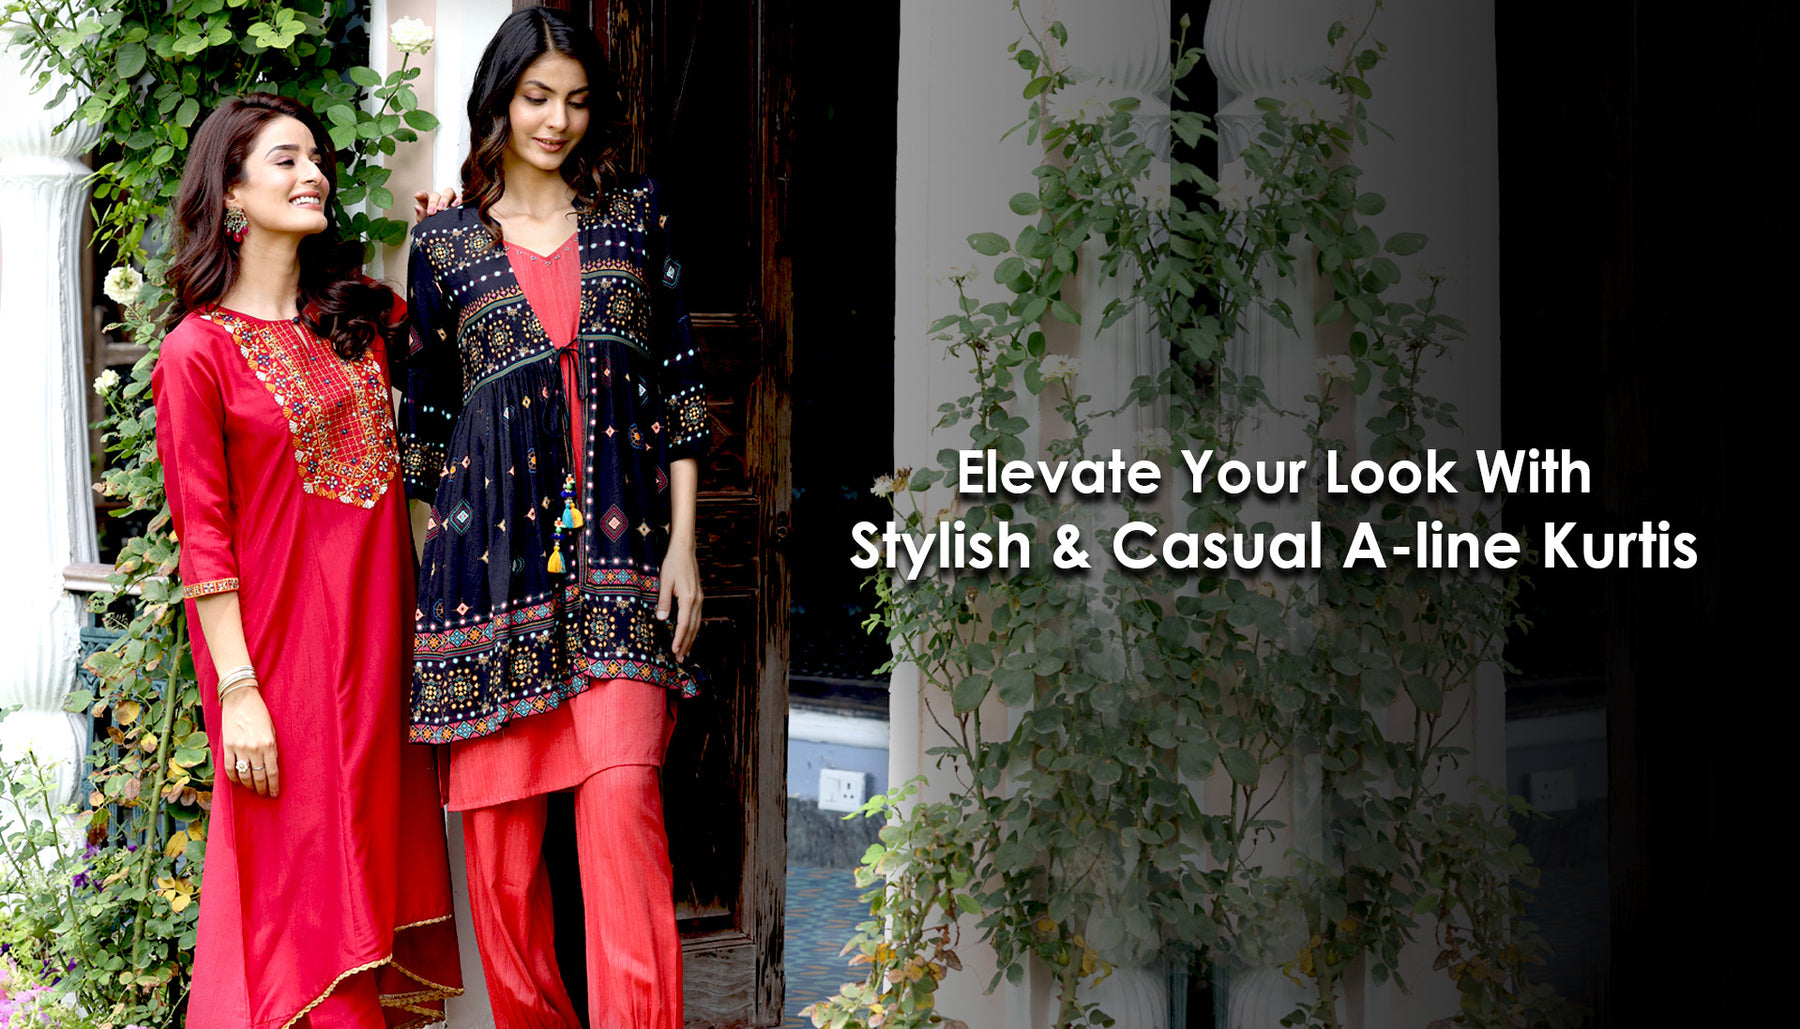 Elevate Your Look With Stylish Casual And Couture A-line Kurtis